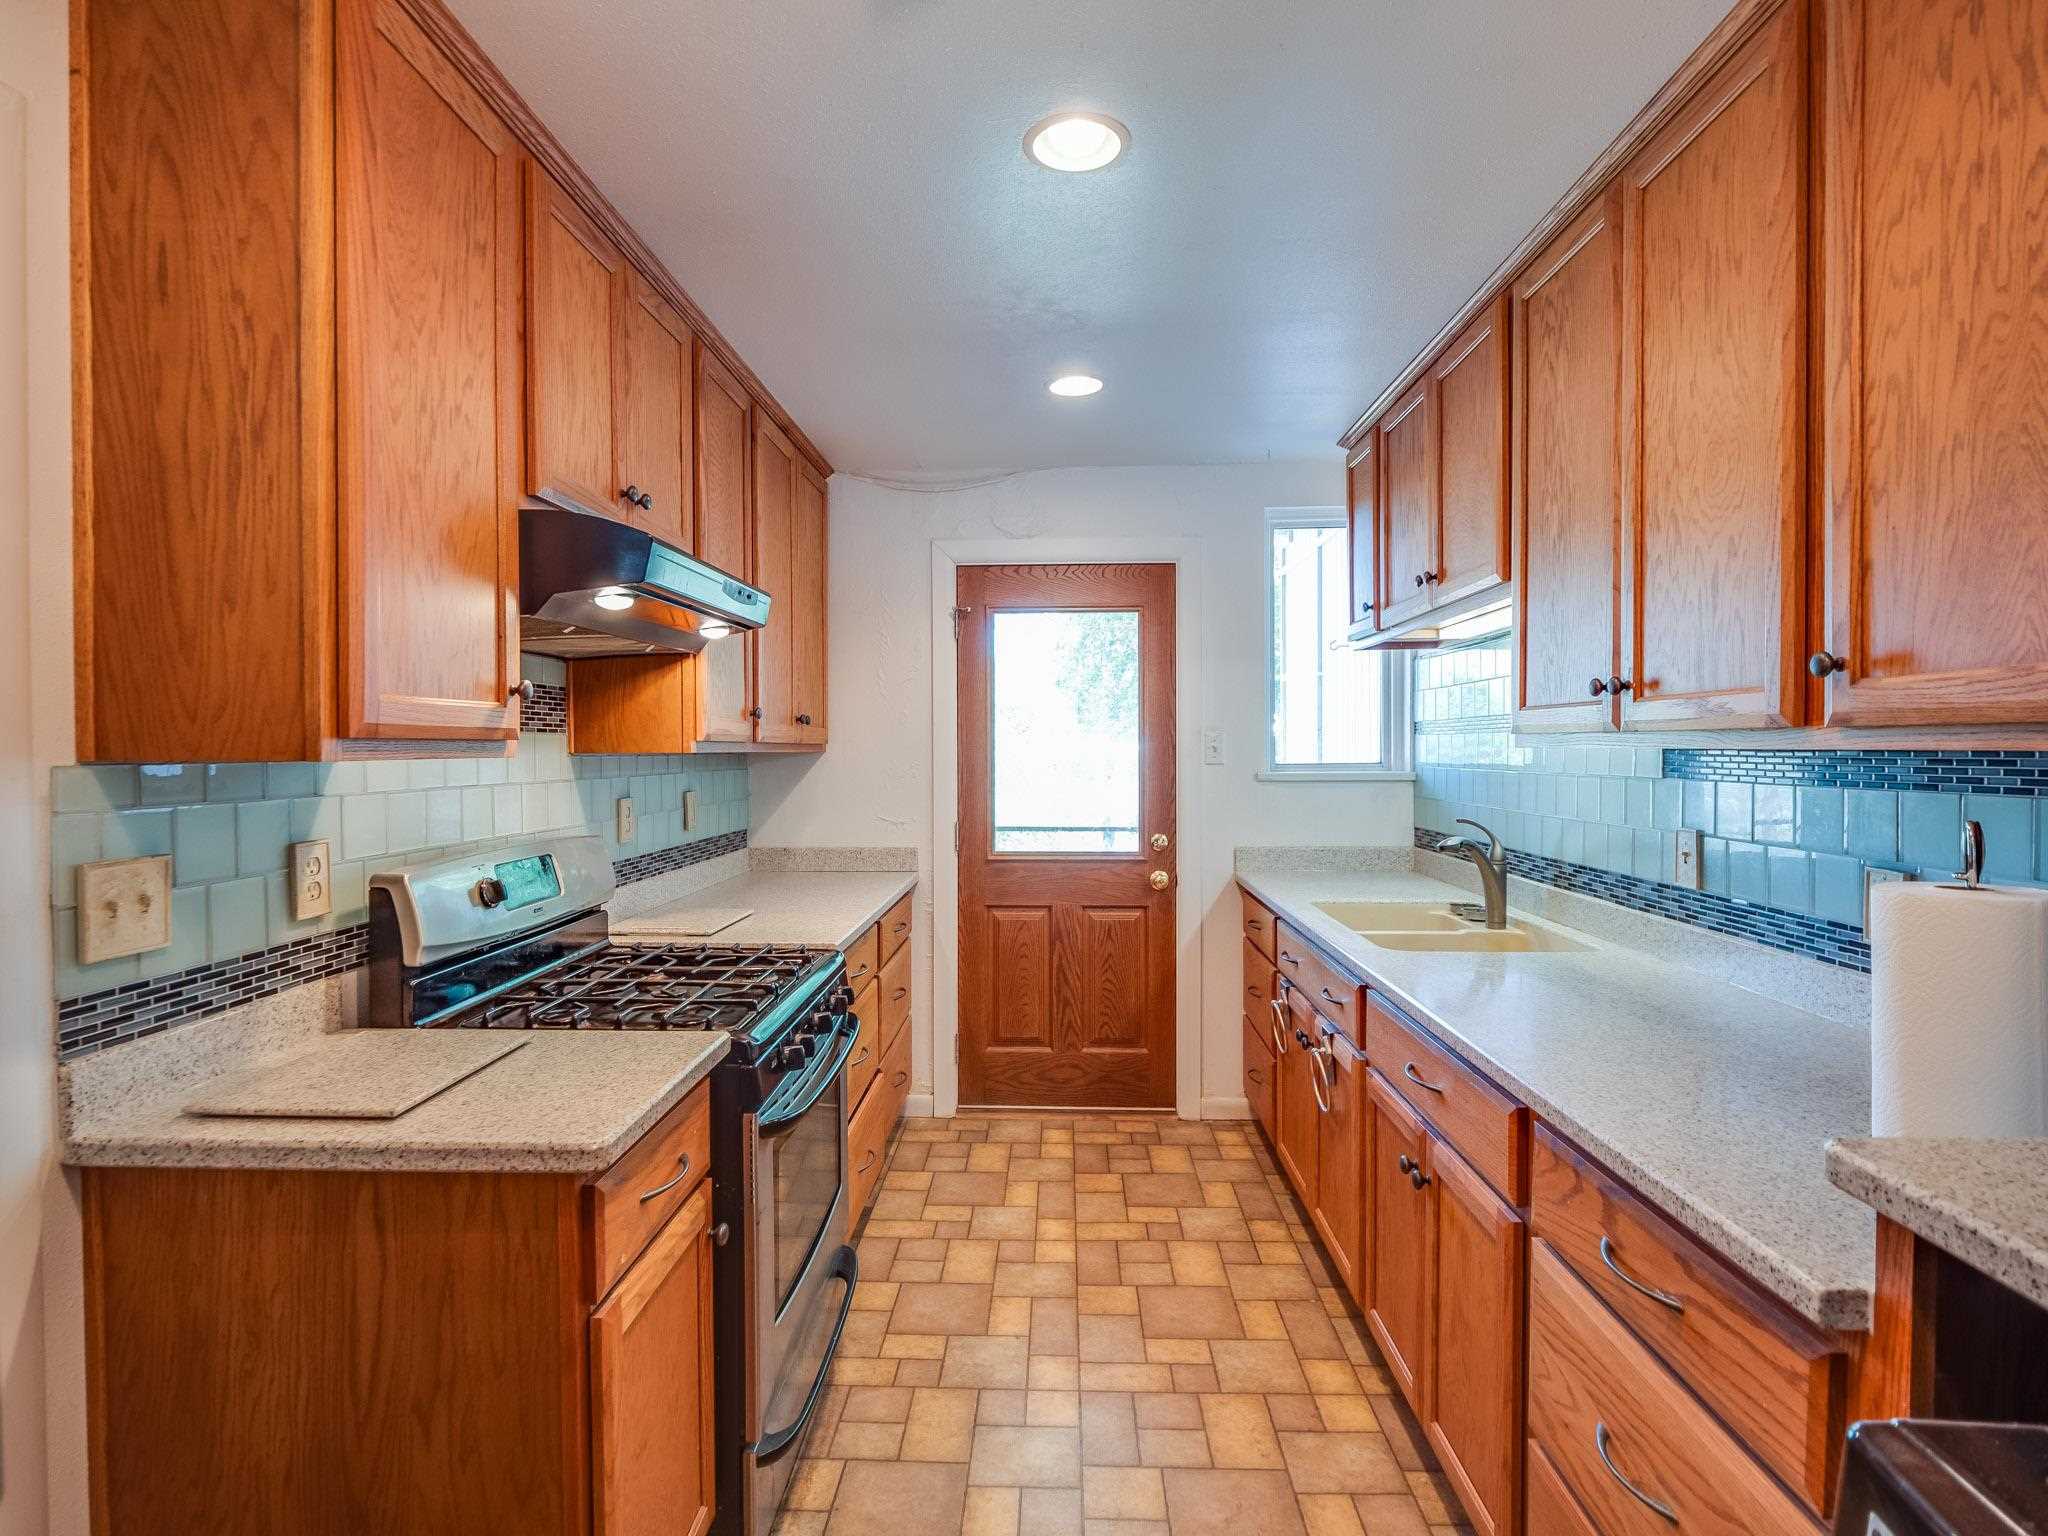 710 41ST, Los Alamos, New Mexico 87544, 2 Bedrooms Bedrooms, ,1 BathroomBathrooms,Residential,For Sale,710 41ST,202102428